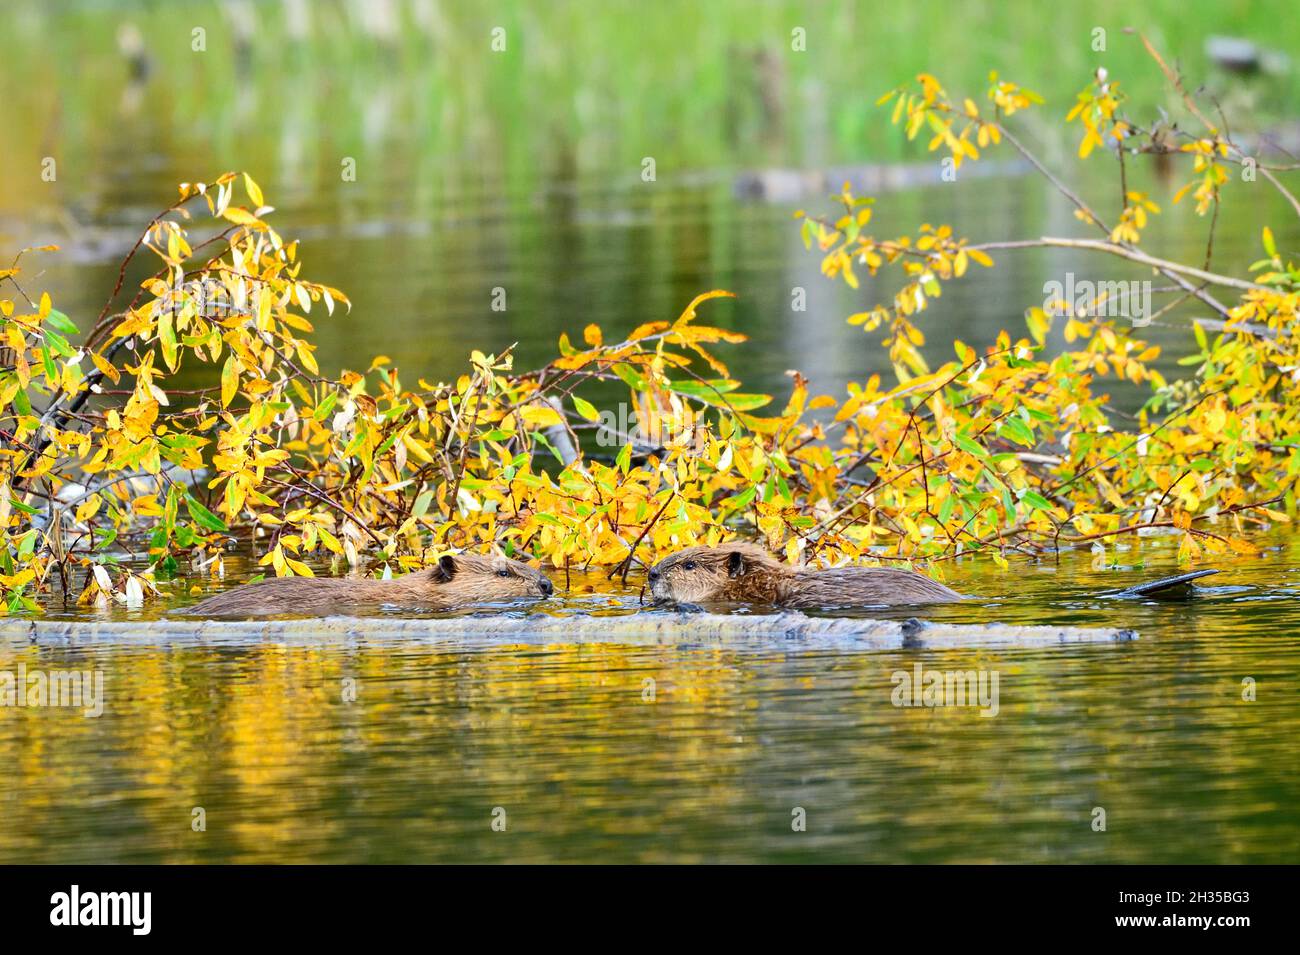 Two young beavers 'Castor canadensis', feeding and playing at the winter feeding pile in the beaver pond at Maxwell Lake near Hinton Alberta Canada. Stock Photo